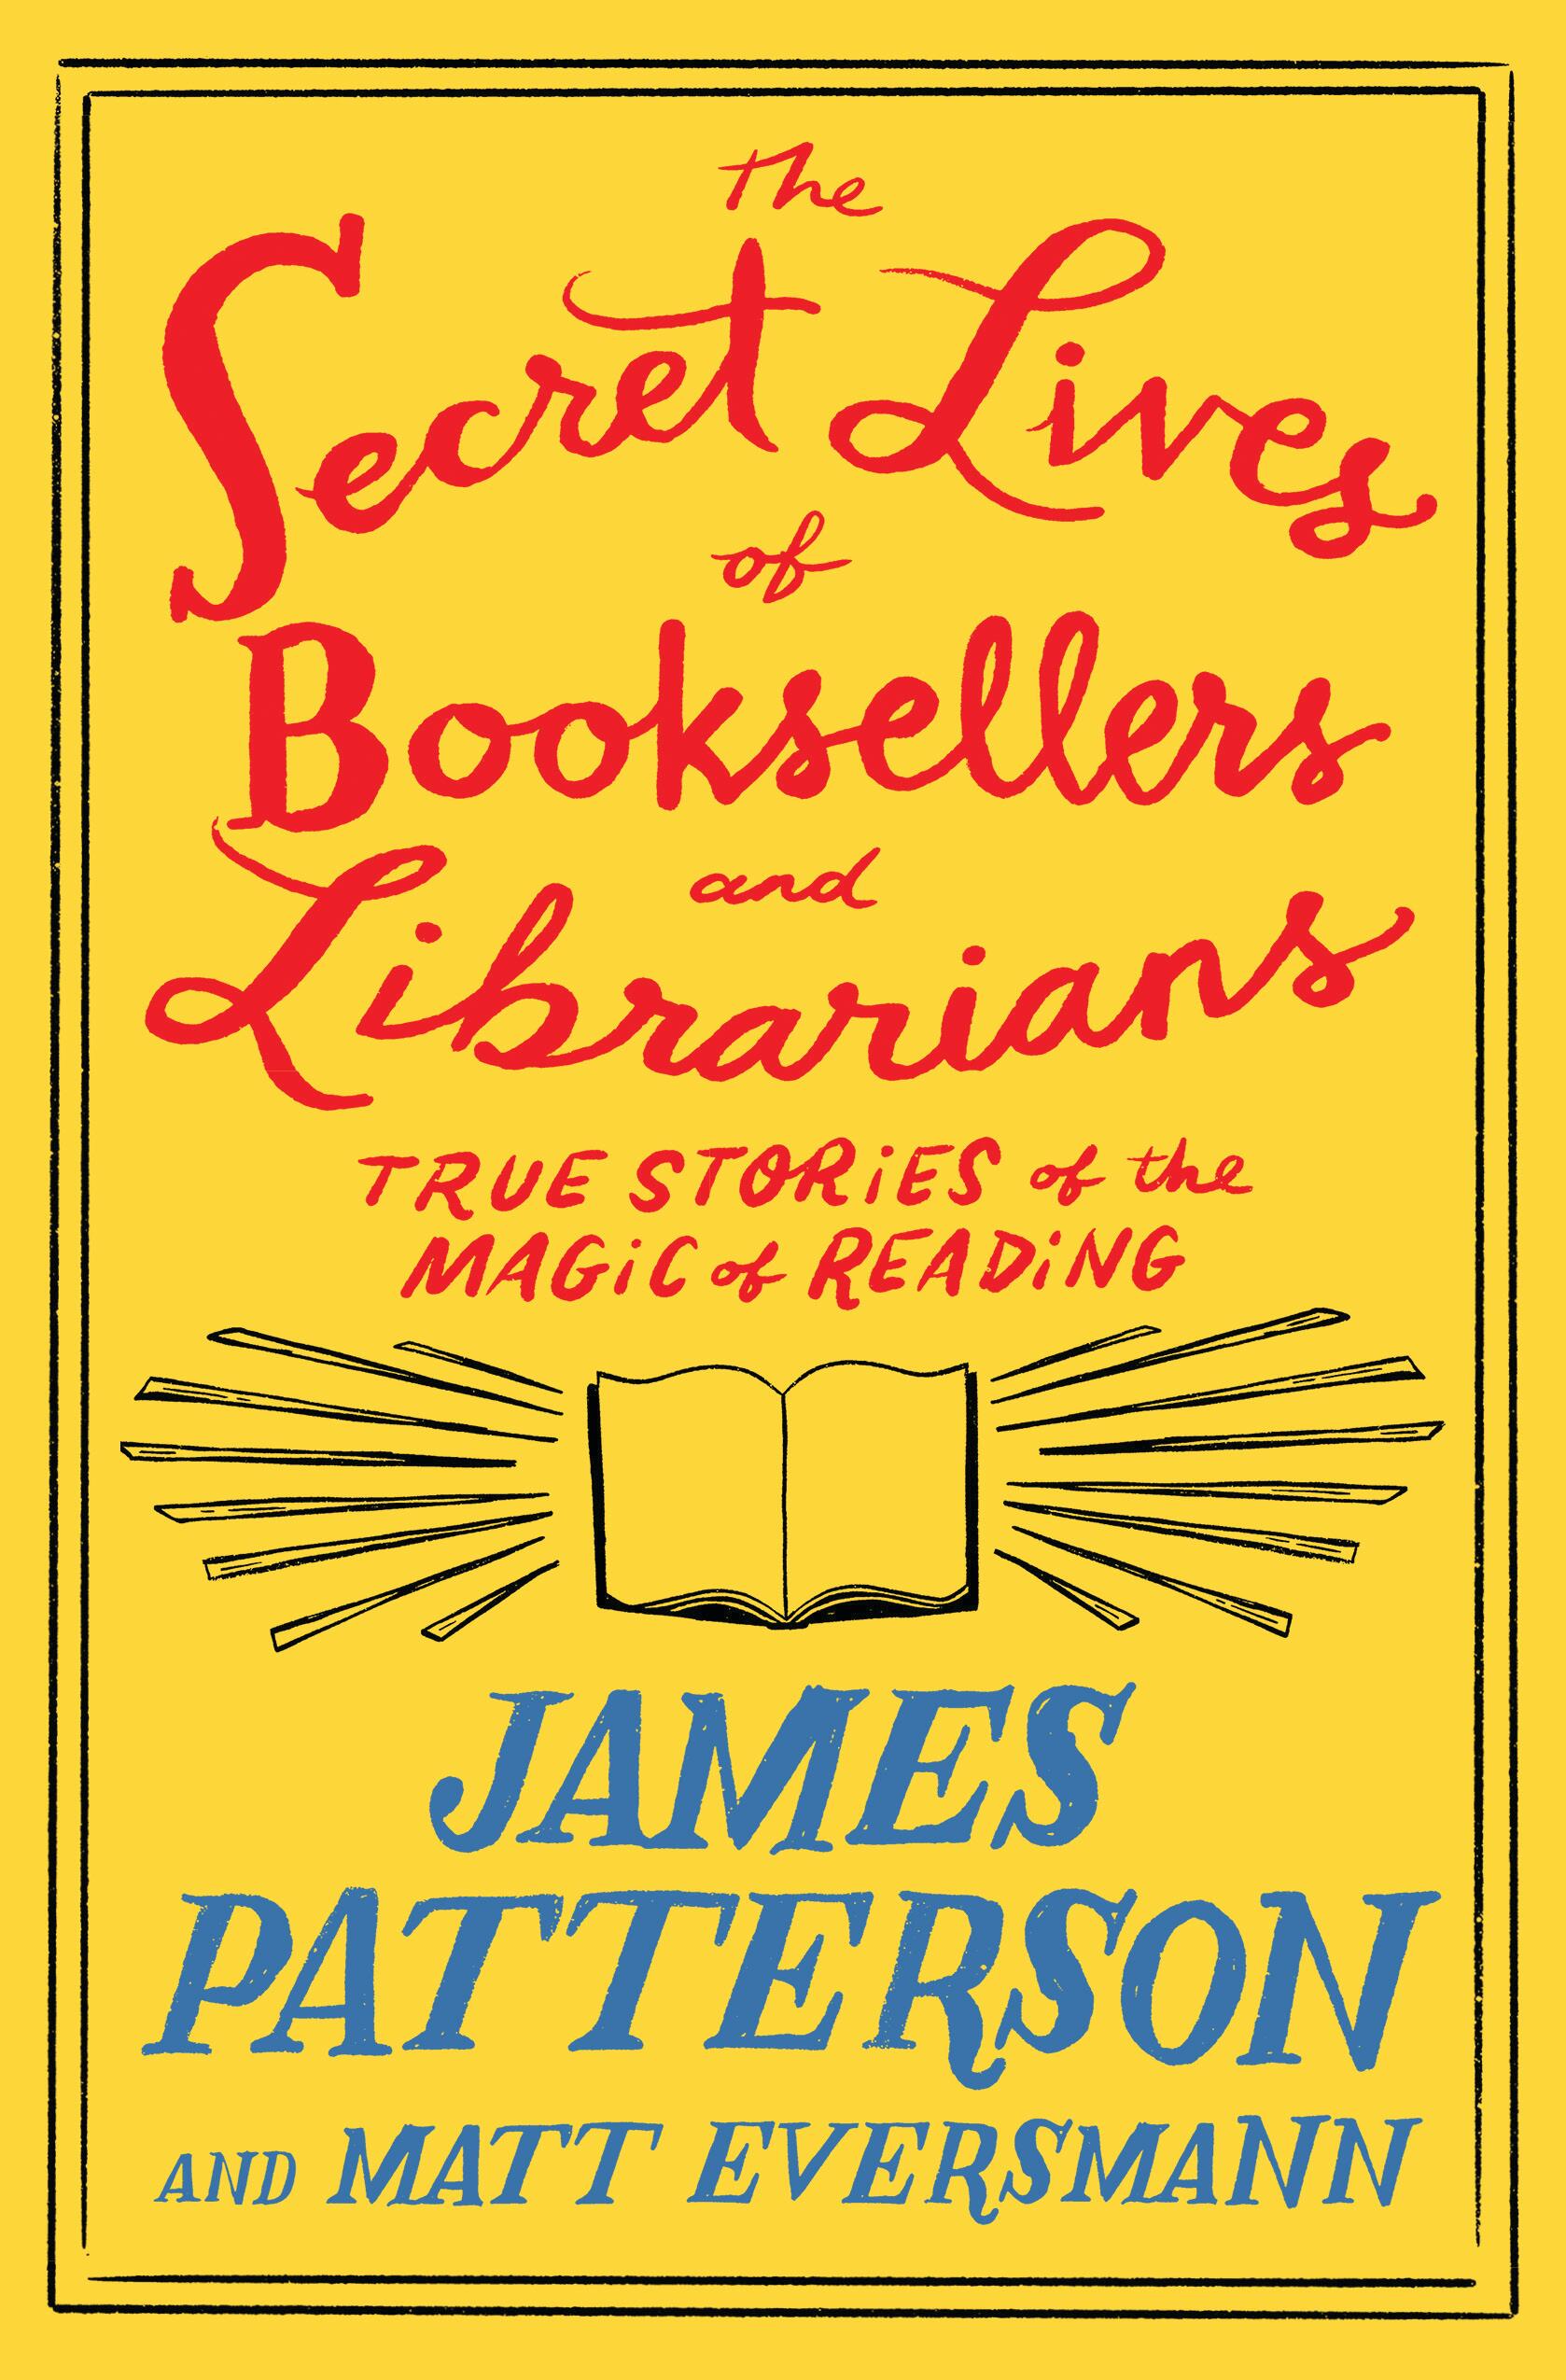 The Secret Lives of Booksellers and Librarians by James Patterson and Matt Eversmann